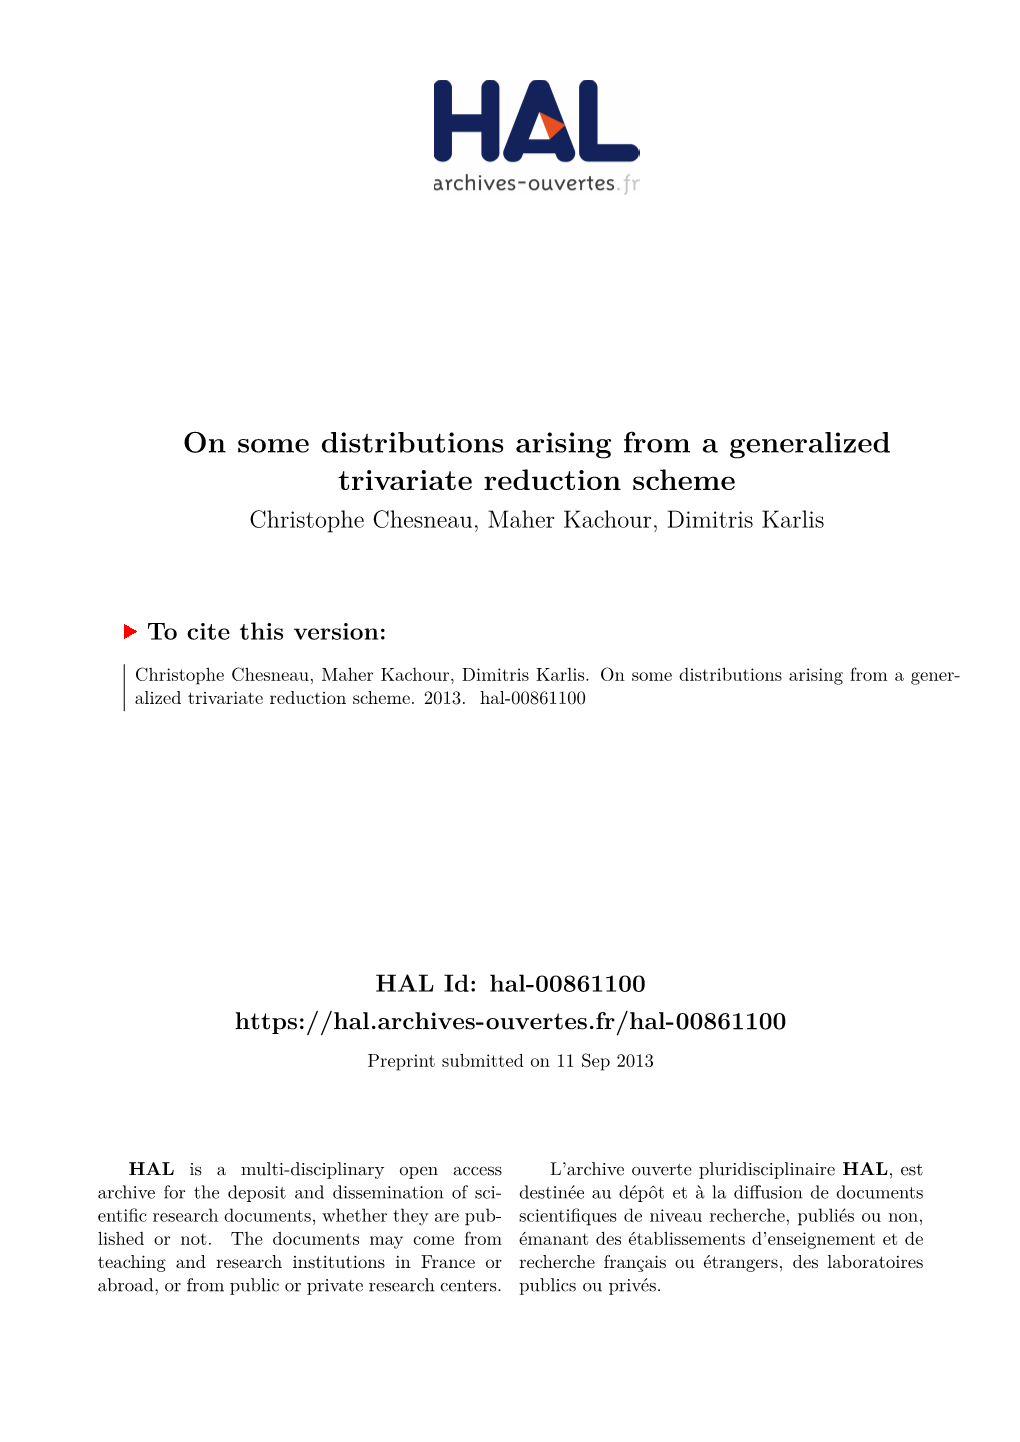 On Some Distributions Arising from a Generalized Trivariate Reduction Scheme Christophe Chesneau, Maher Kachour, Dimitris Karlis